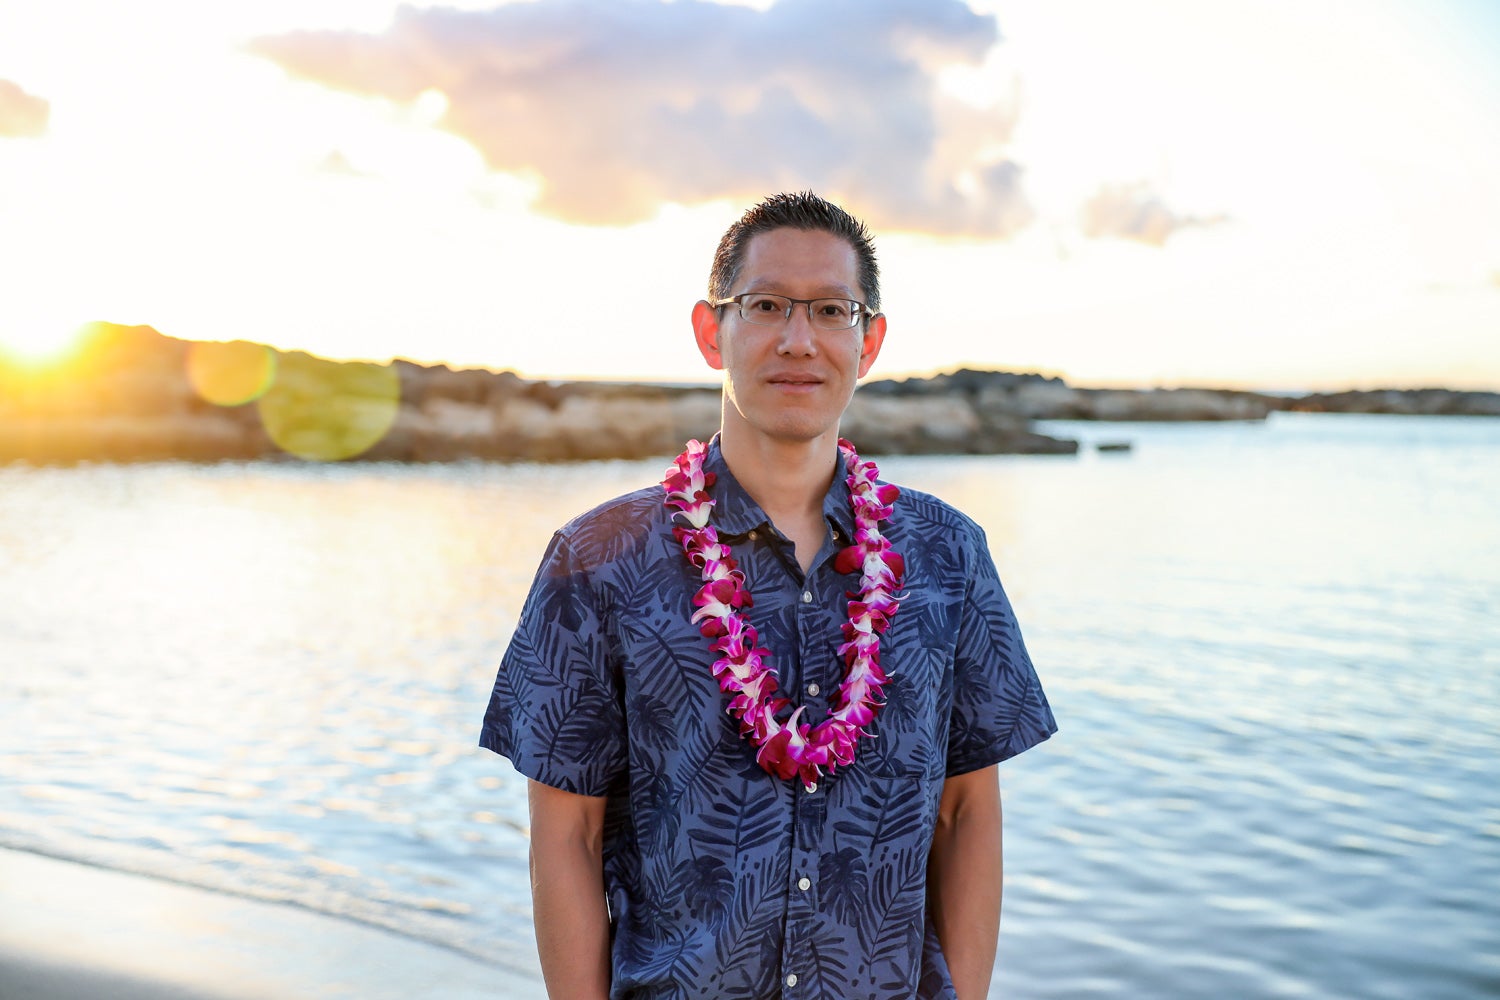 Jimmy Lin, an Asian man with glasses, wears a Hawaiian shirt and lei and stands on a beach